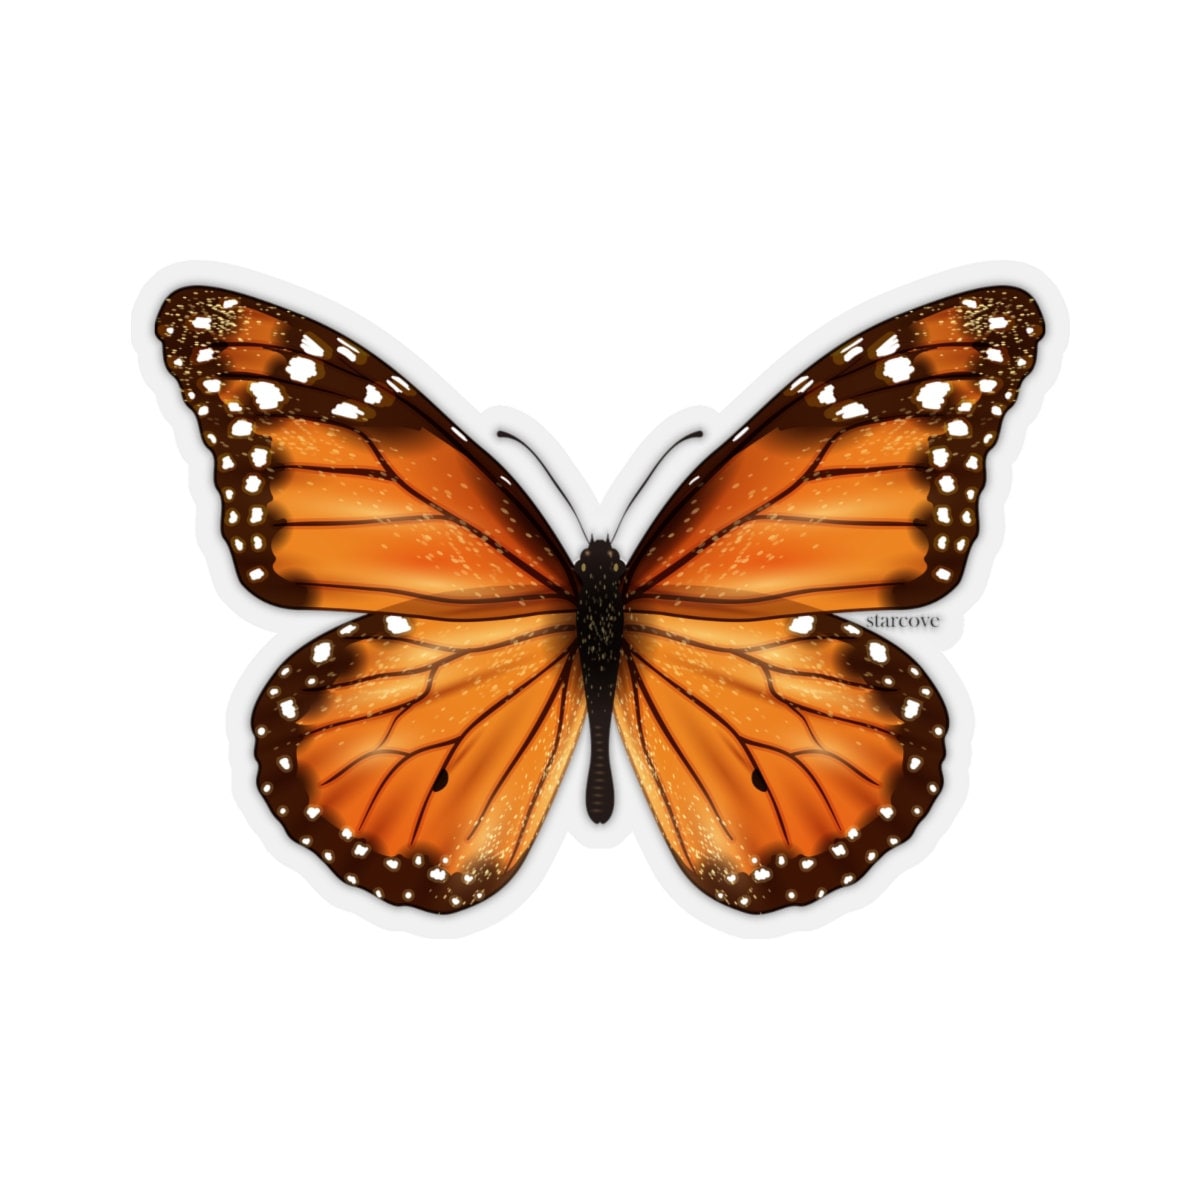 Monarch Butterfly Decal Art Stickers decoration Insect Laptop Vinyl Cute  Waterproof Waterbottle Tumbler Car Bumper Aesthetic Label Wall sold by Eric  Rogers, SKU 24329554